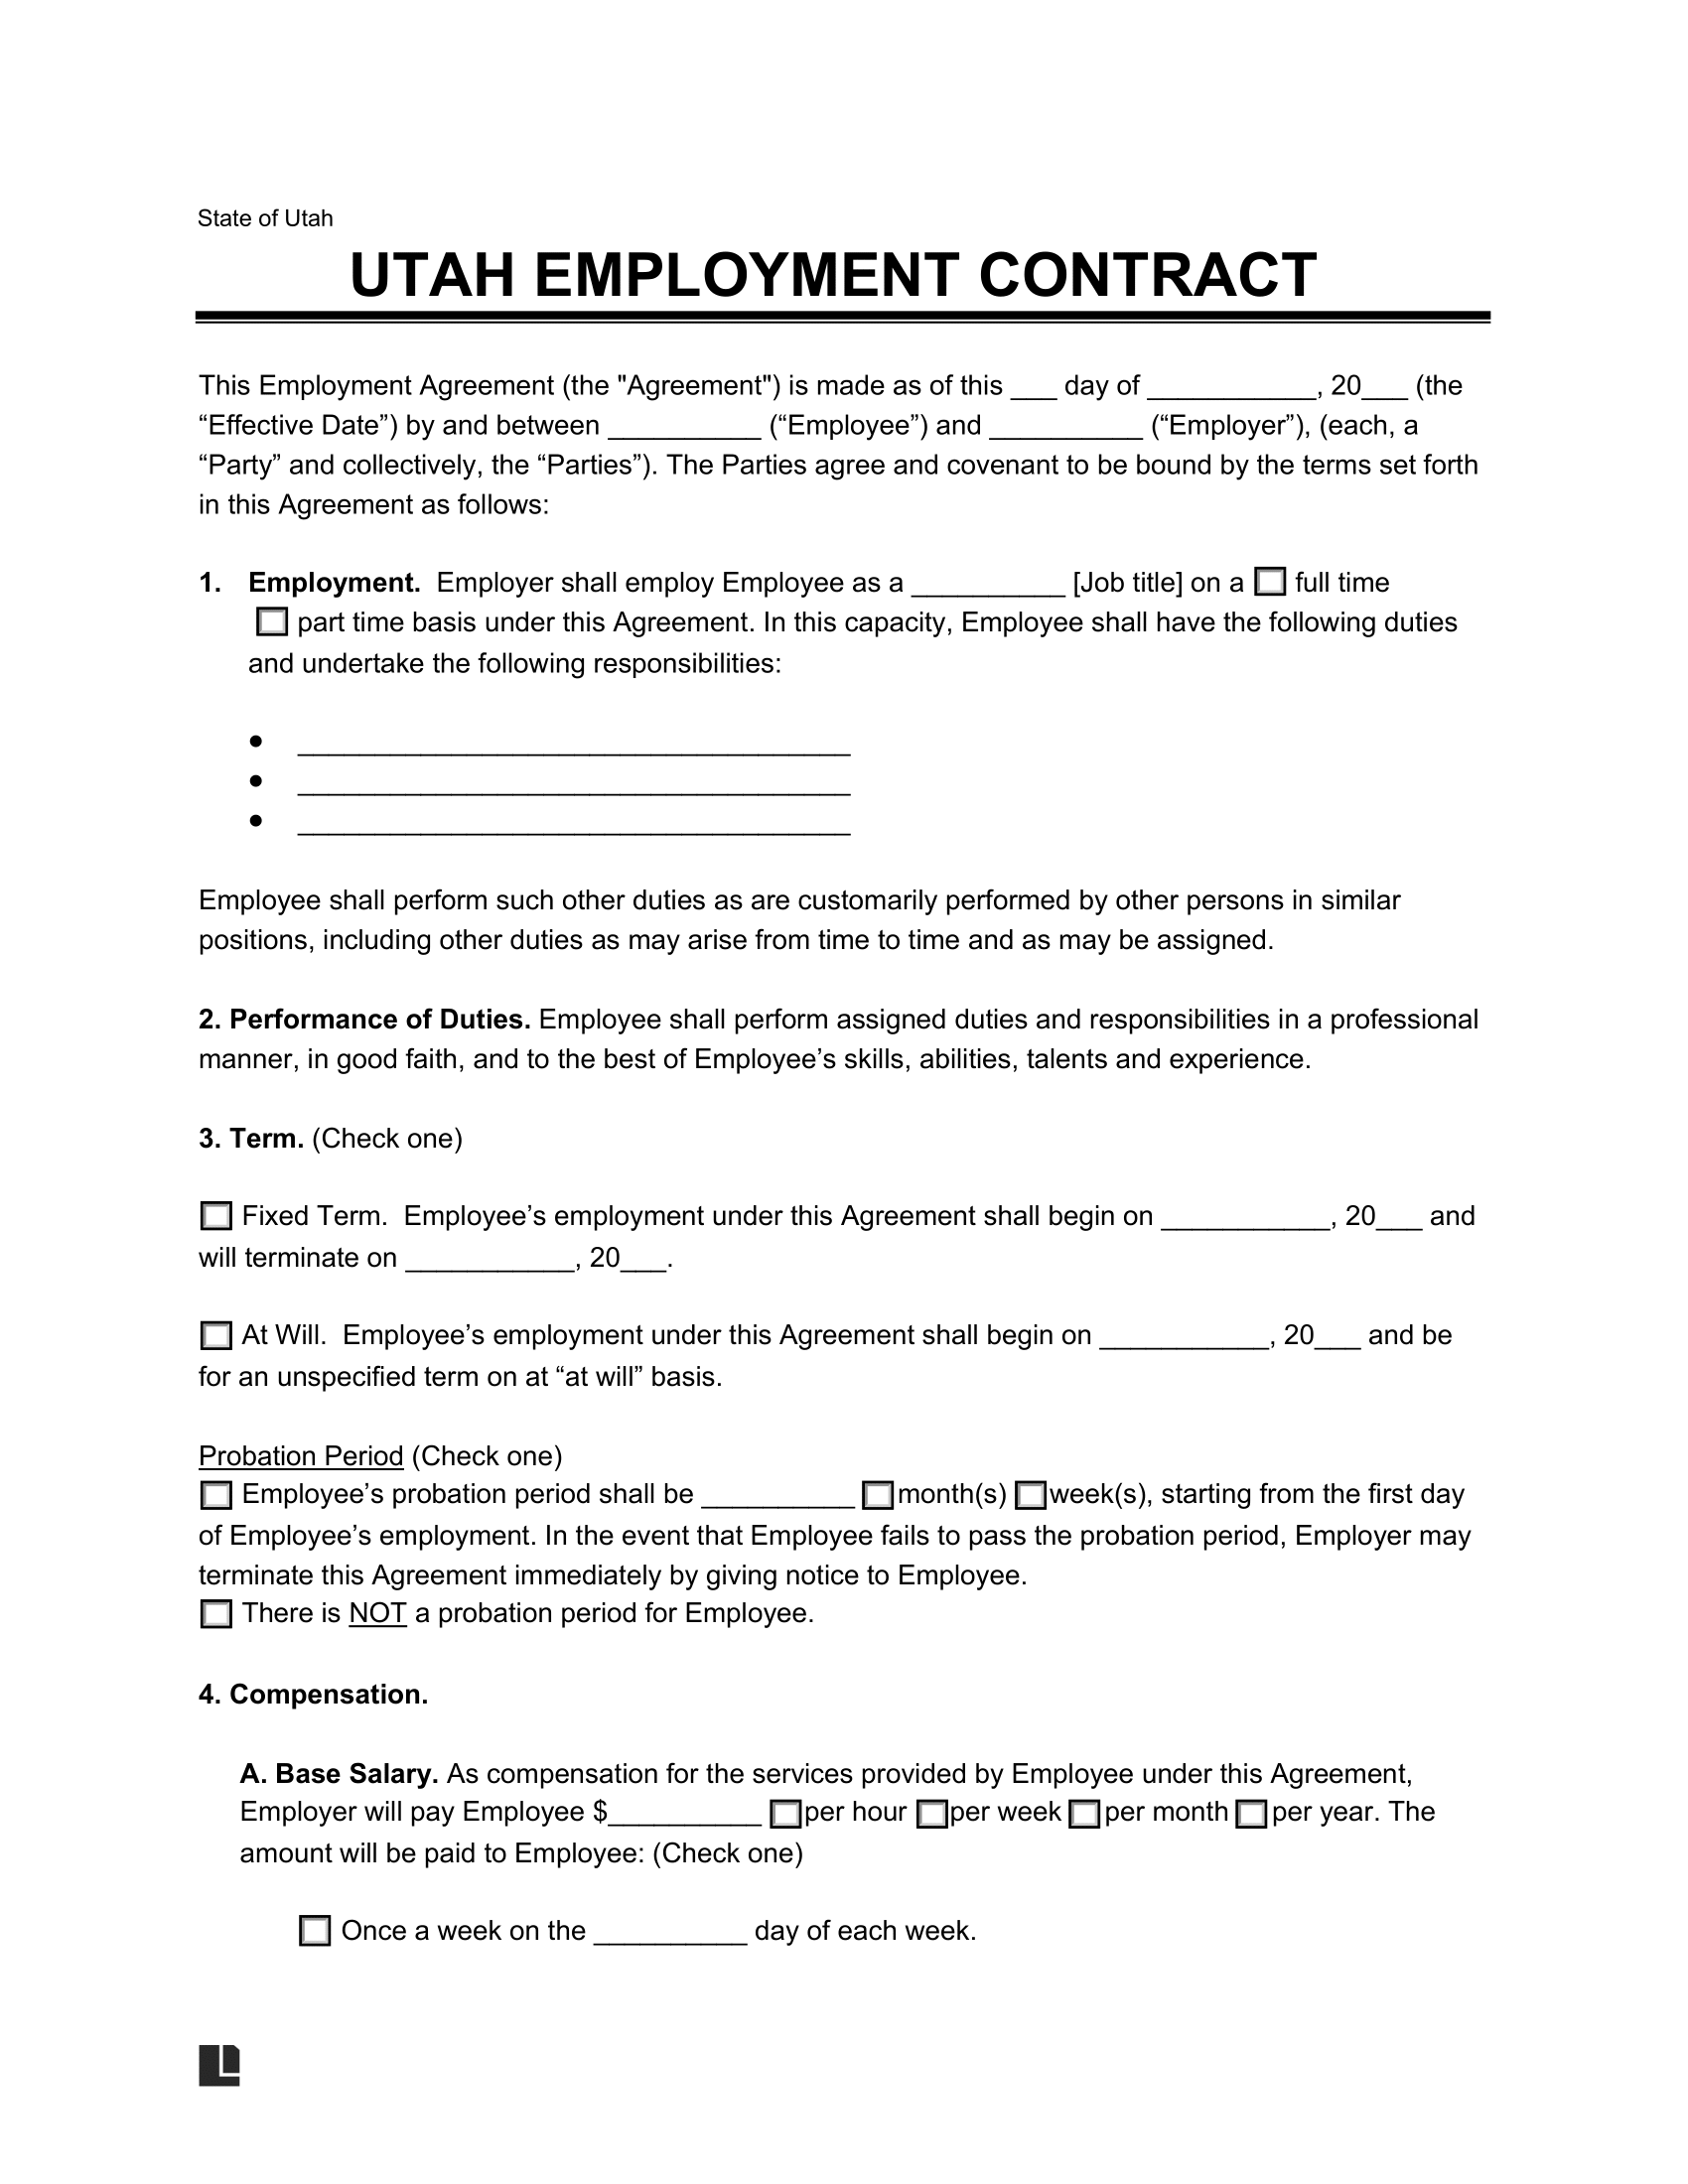 Utah Employment Contract Template